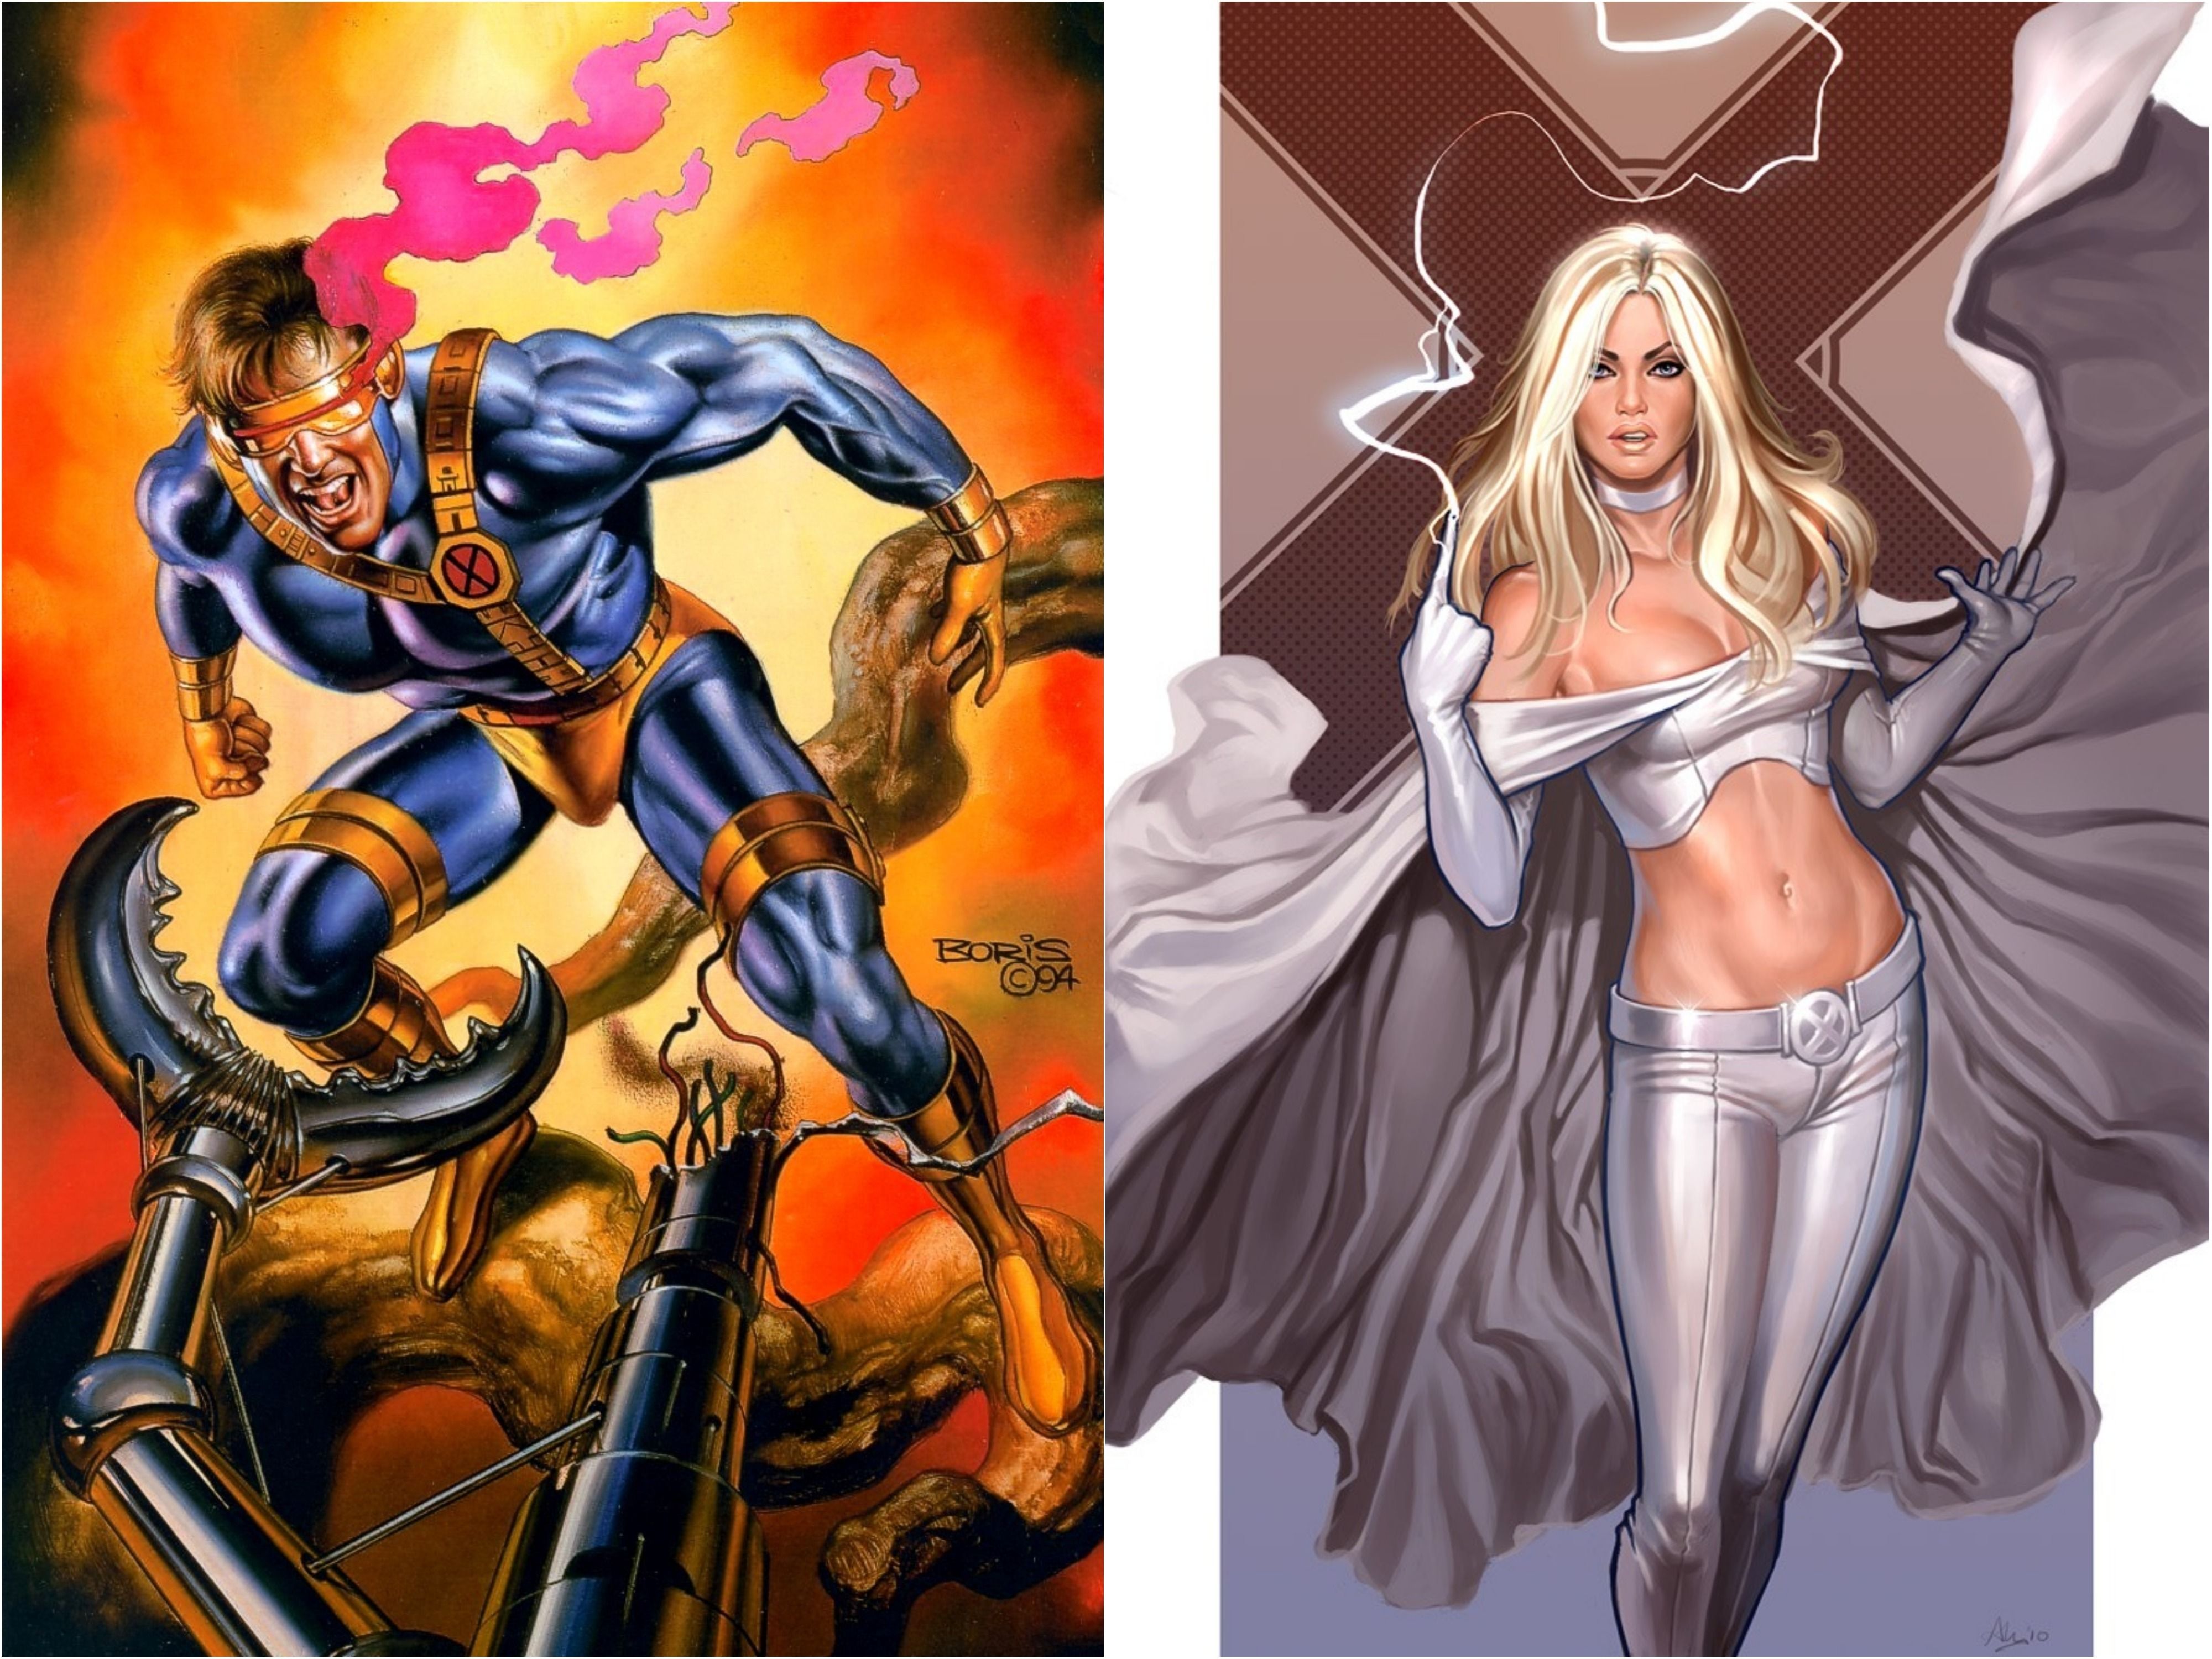 Cyclops and Emma Frost